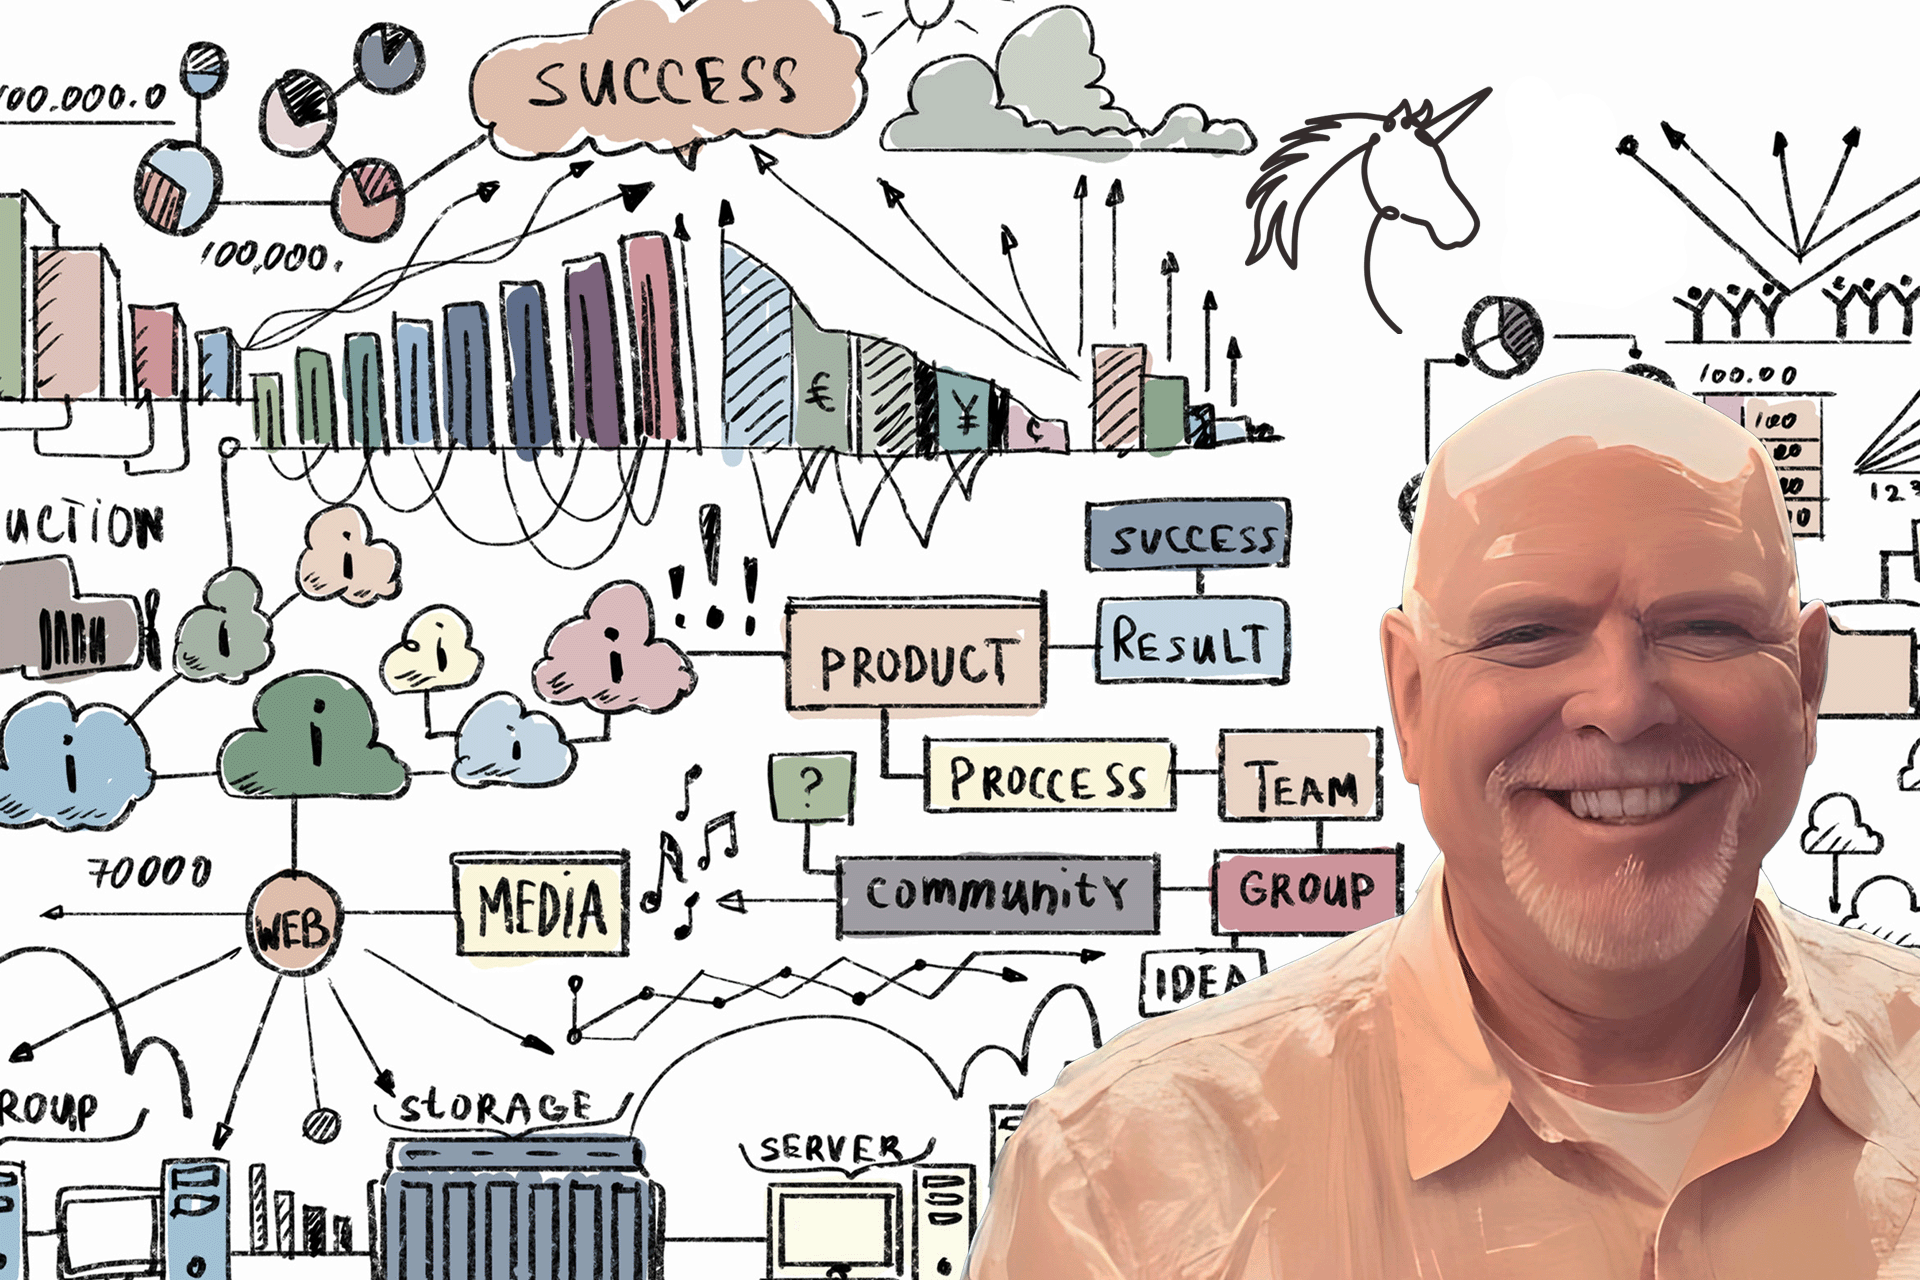 Illustration of dan wenk in front of whiteboard with marketing and web doodles